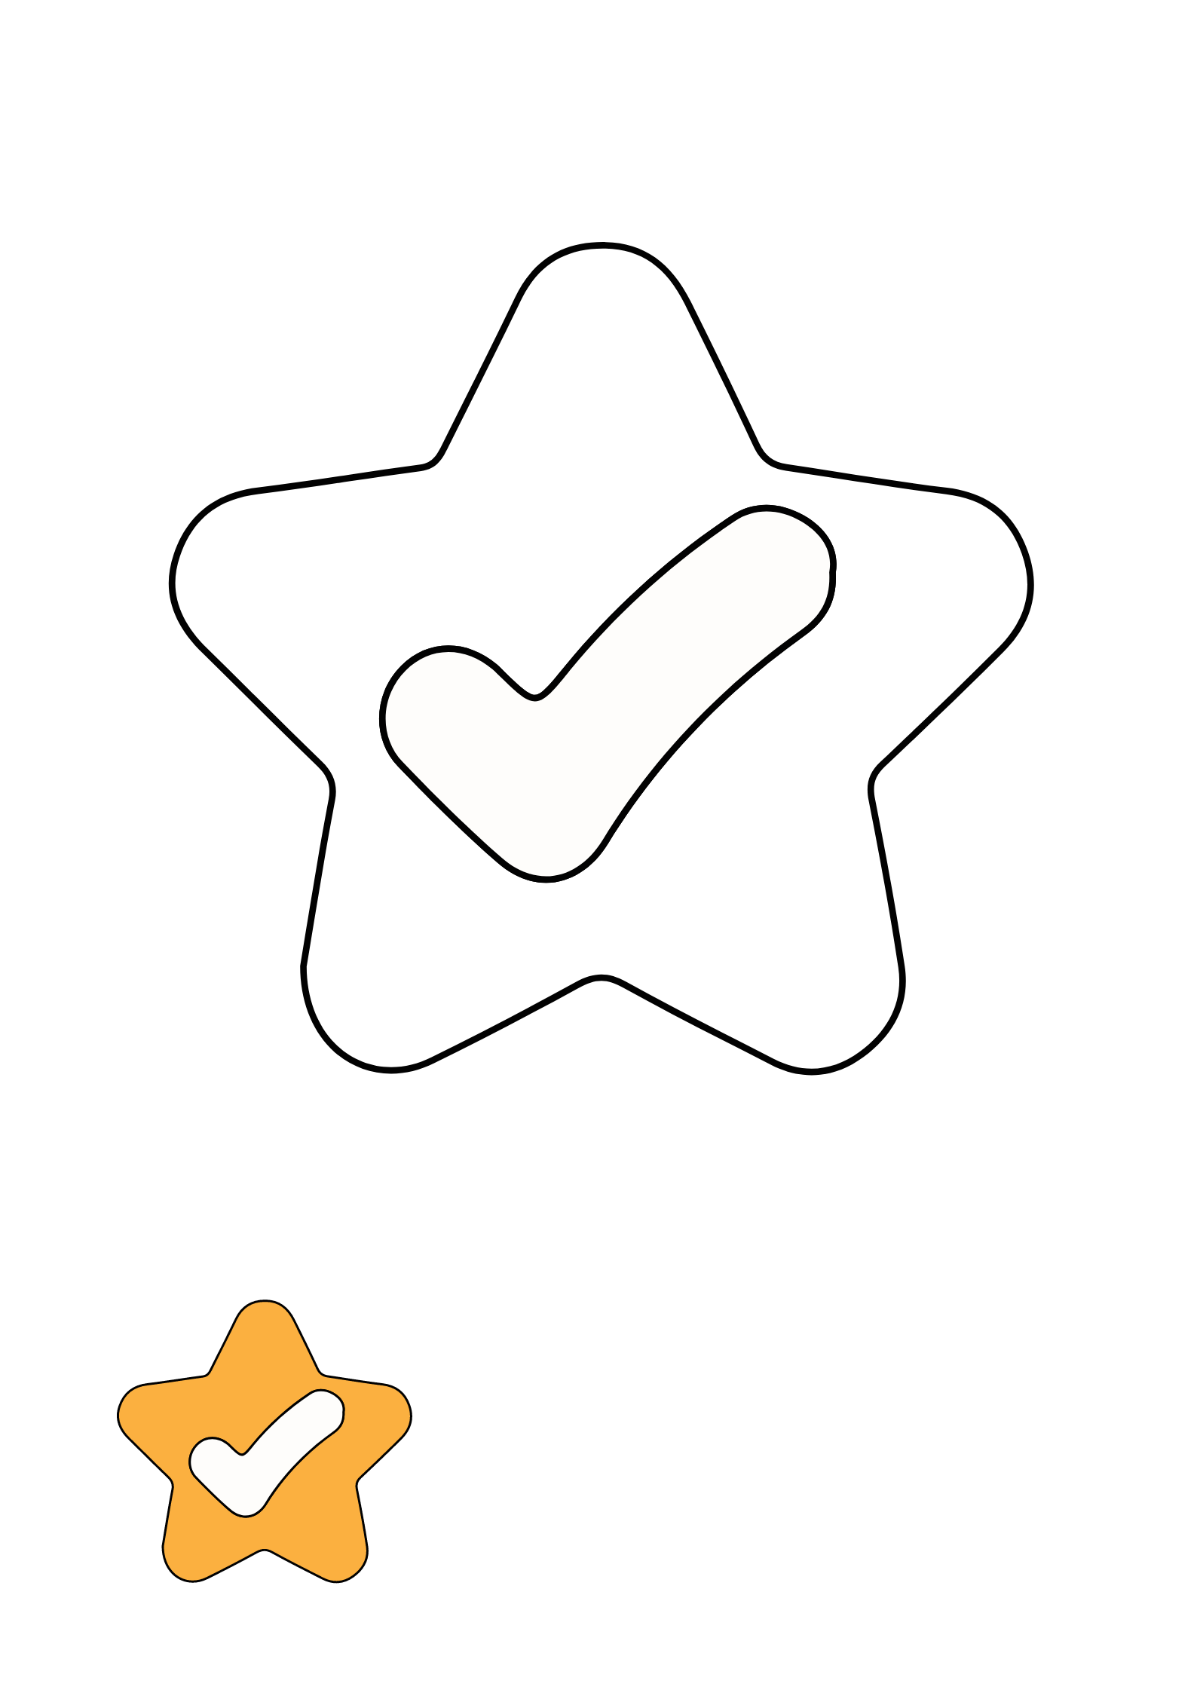 Cute Check Mark coloring page Template